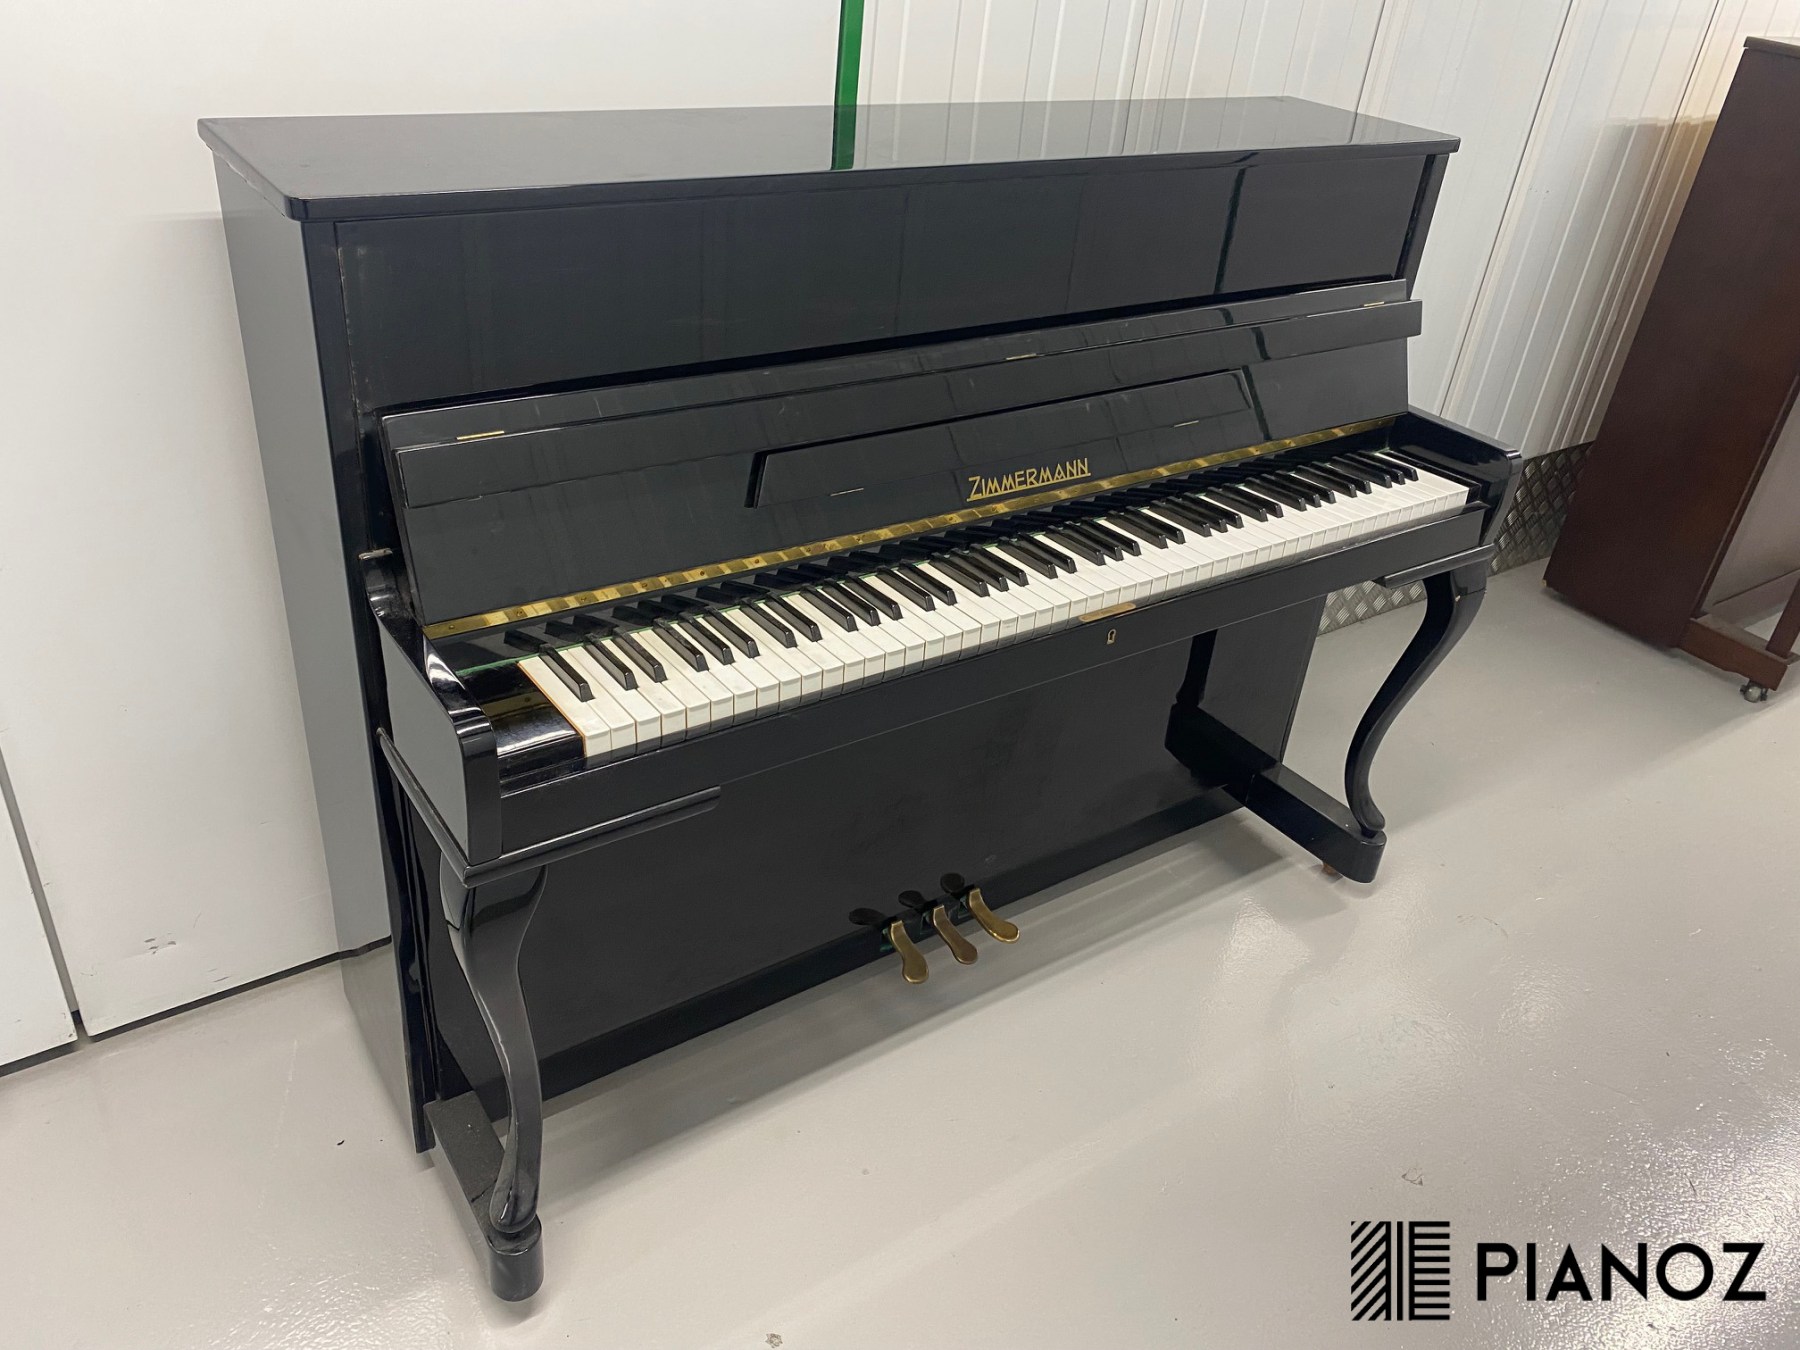 Zimmermann German Upright Piano piano for sale in UK